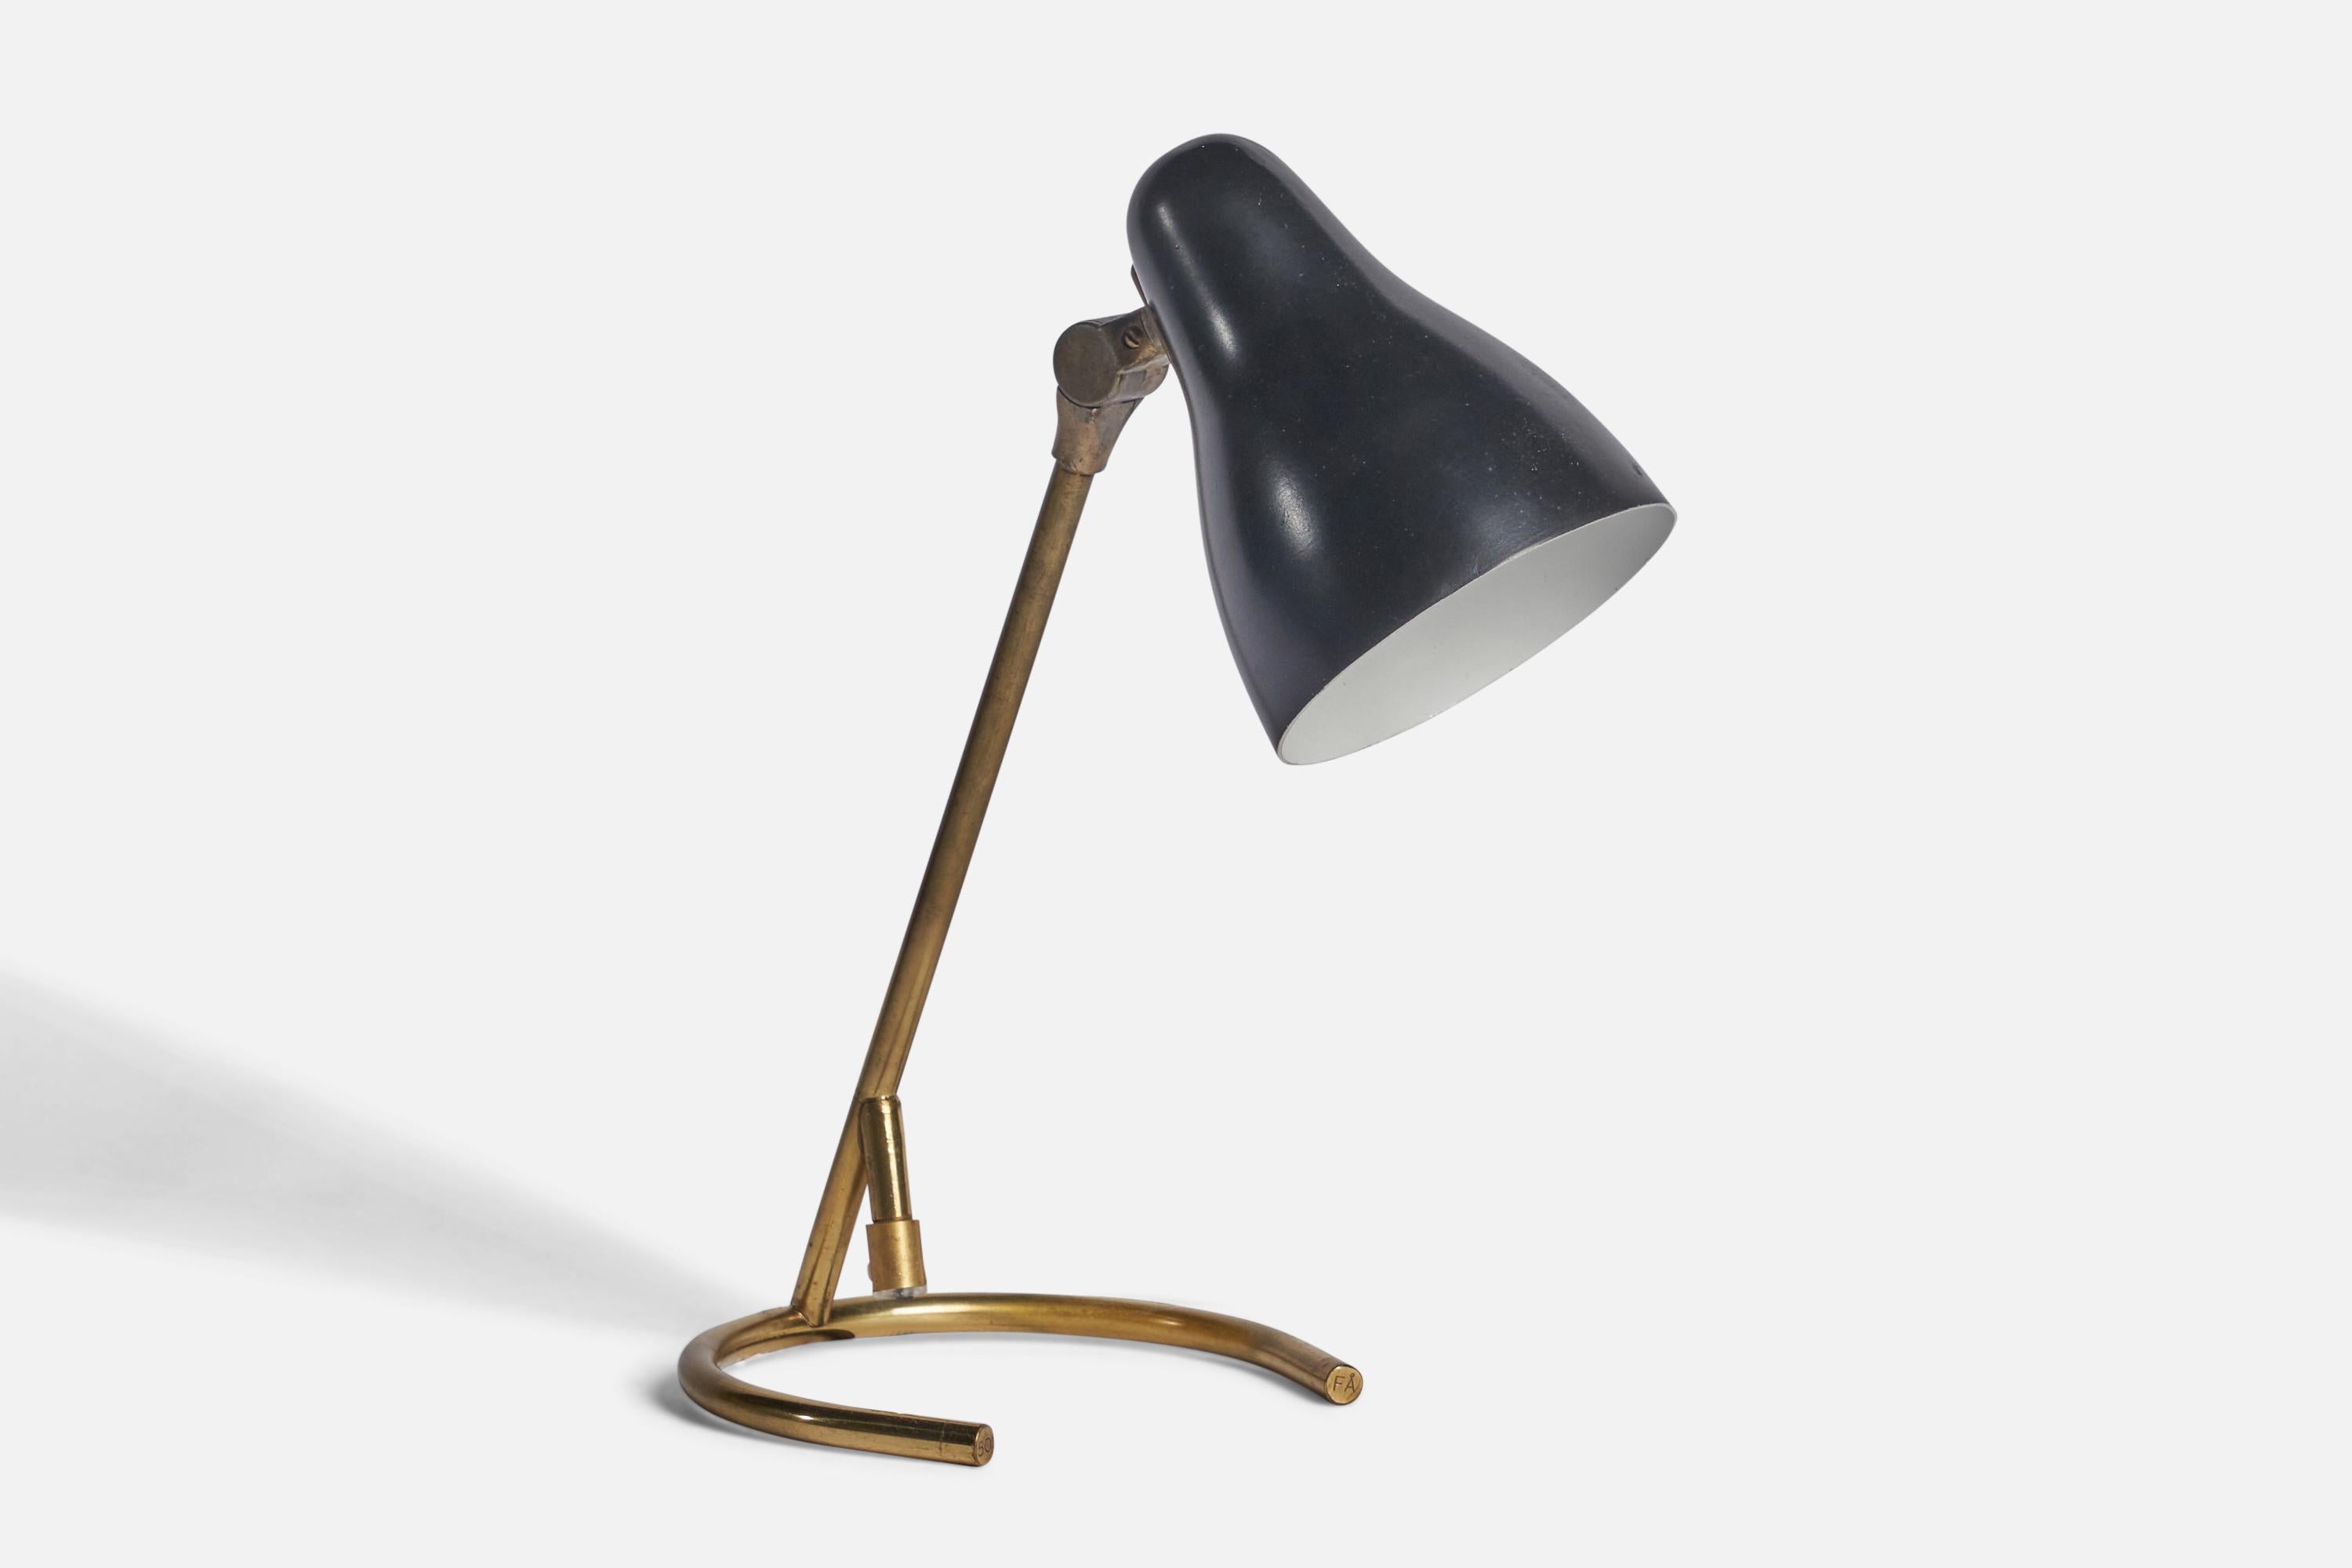 A brass and black-lacquered aluminium table lamp designed and produced in Sweden, 1950s.

Overall Dimensions (inches): 12” H x 6